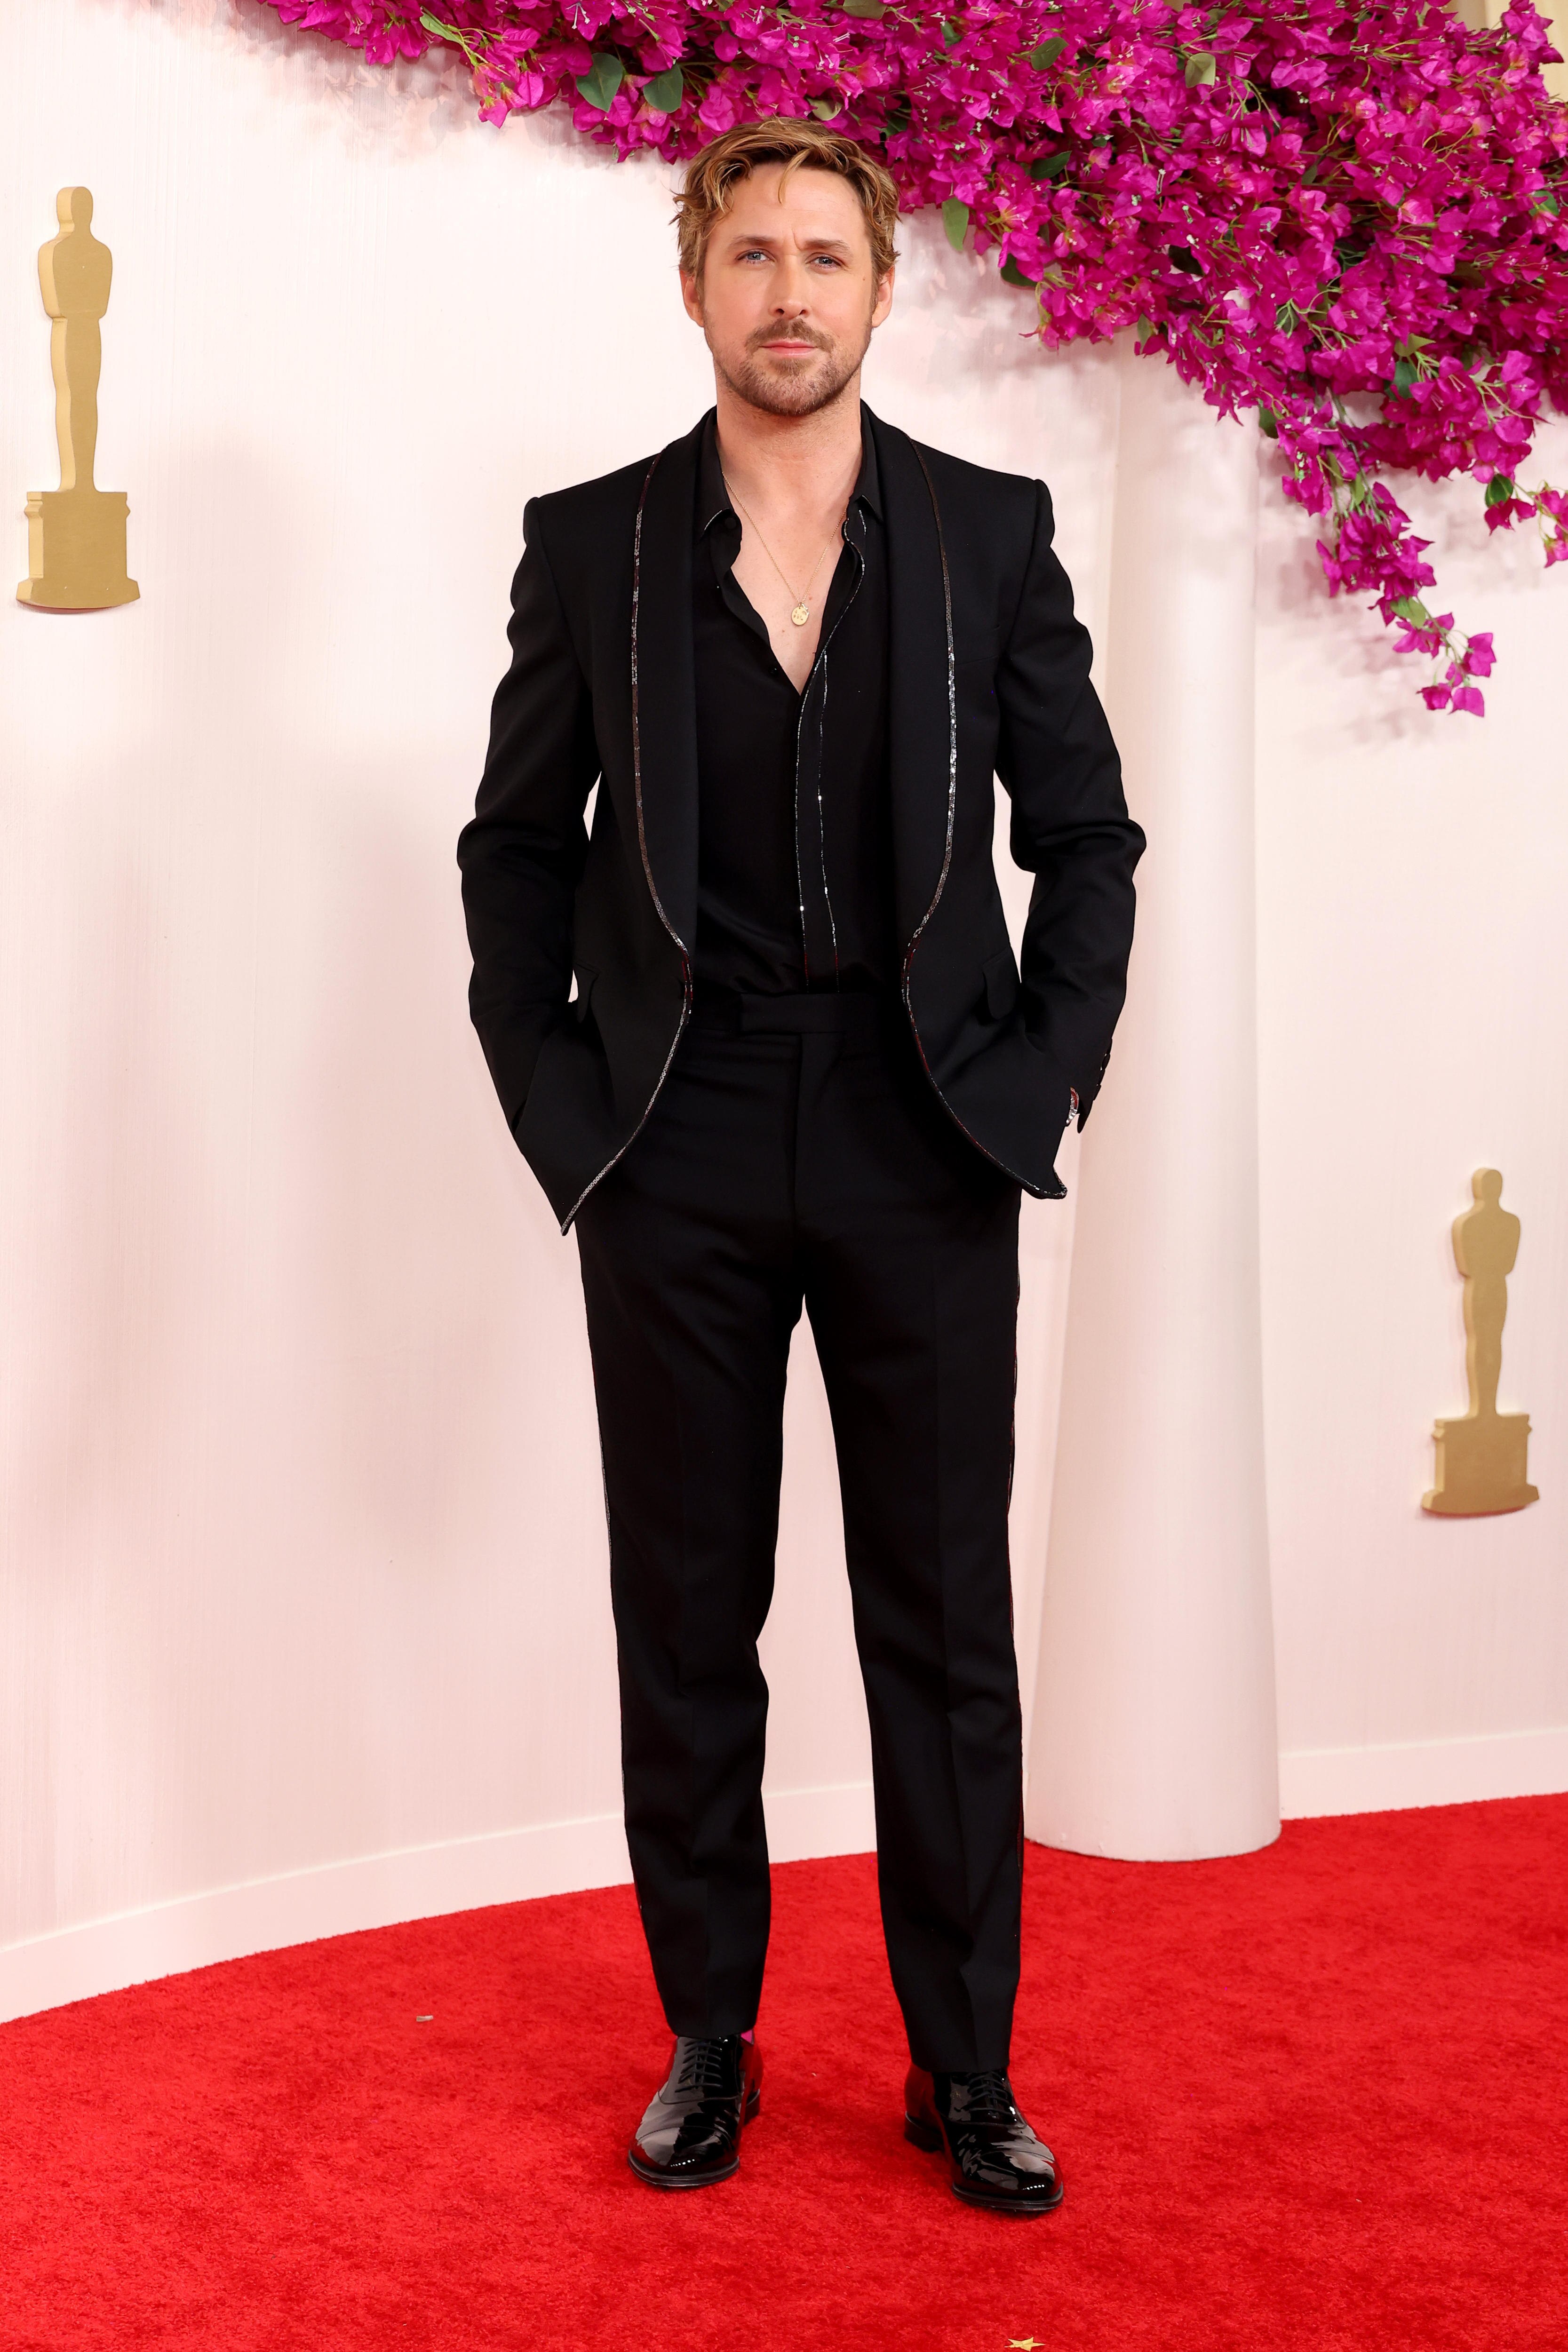 Ryan Gosling in a black suit on the Oscars red carpet